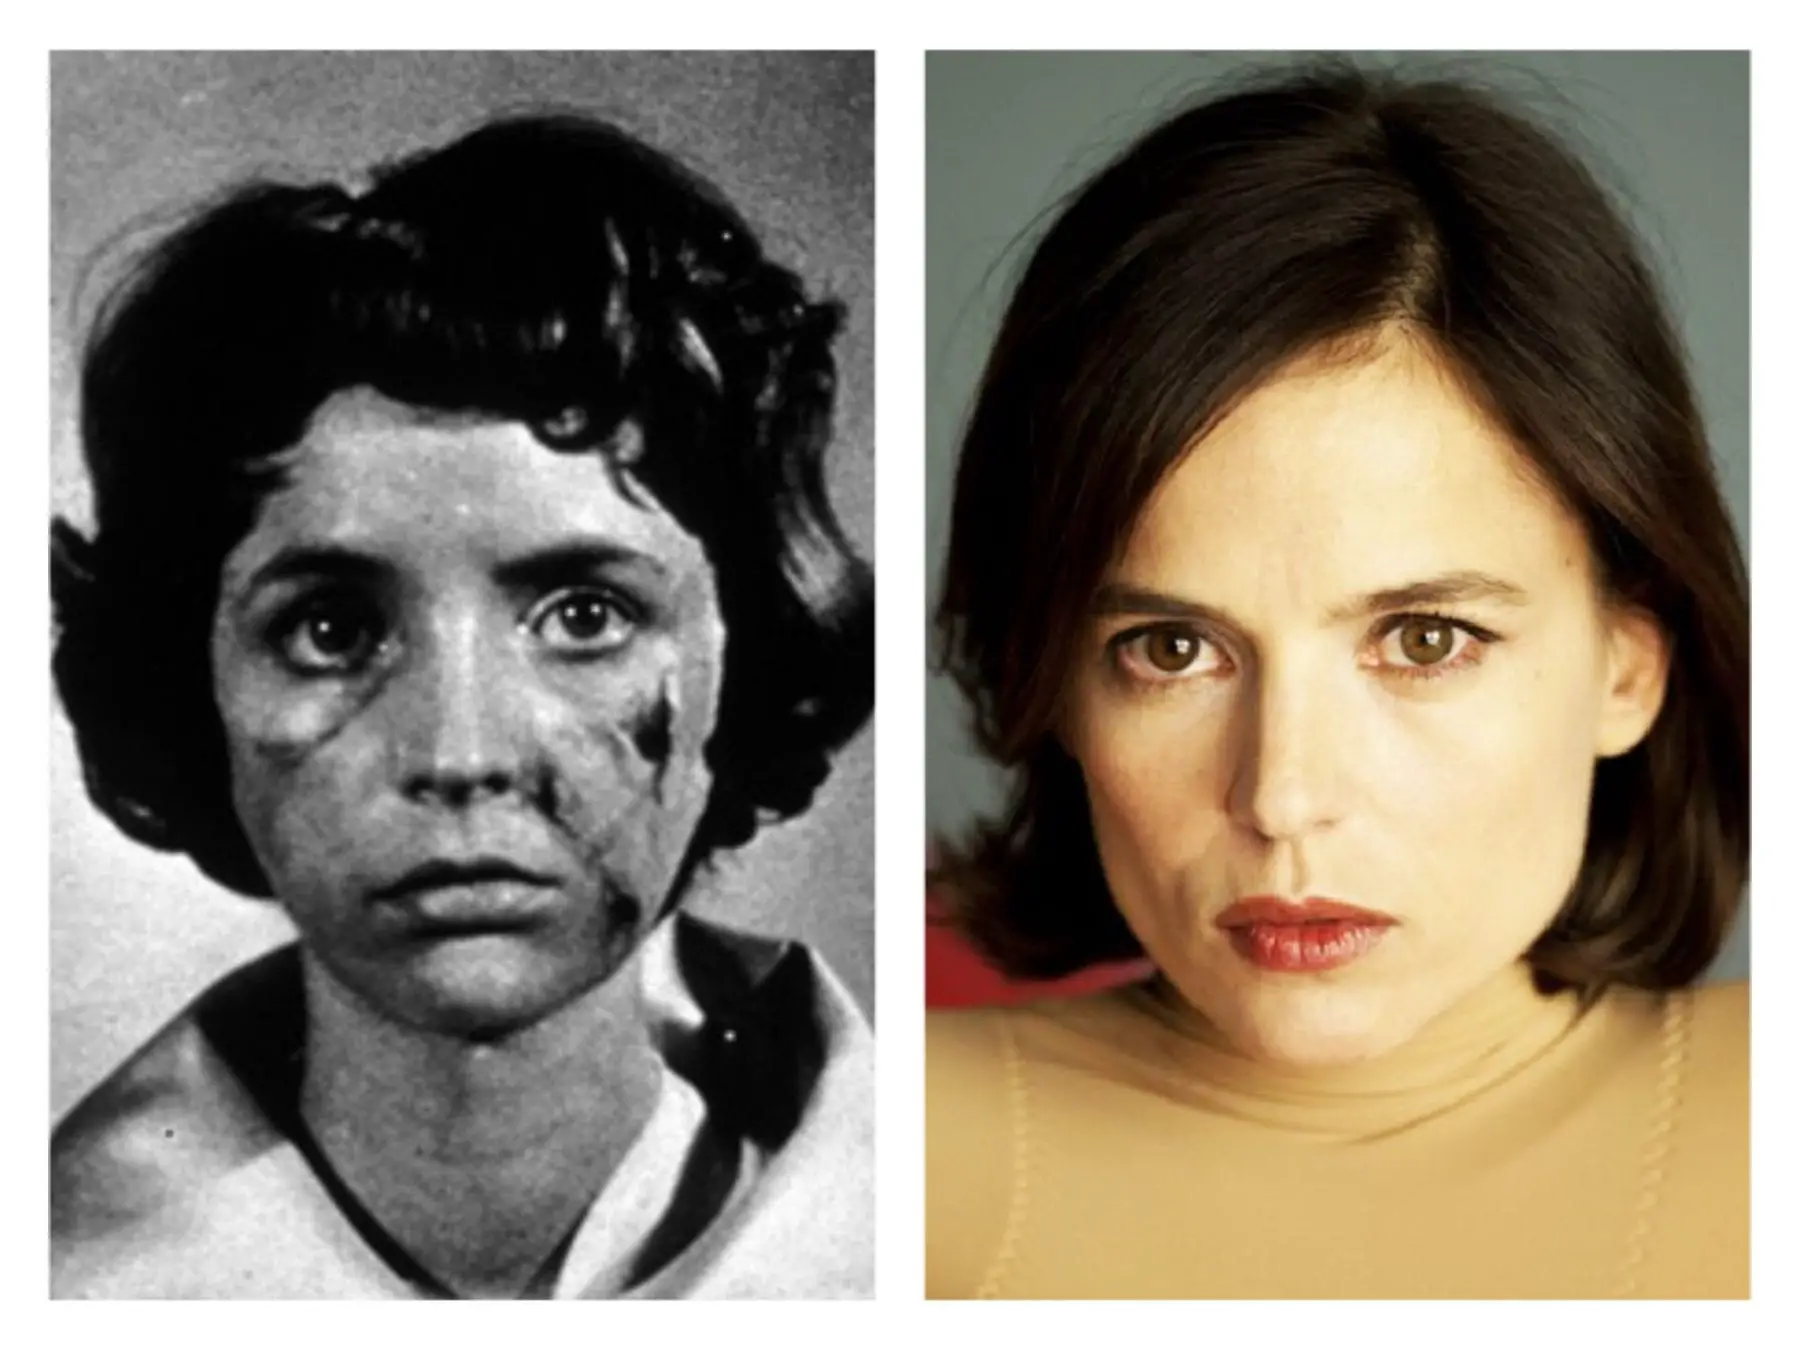 Juxtaposition of Christiane in Eyes Without a Face and Vera in The Skin I Live in.